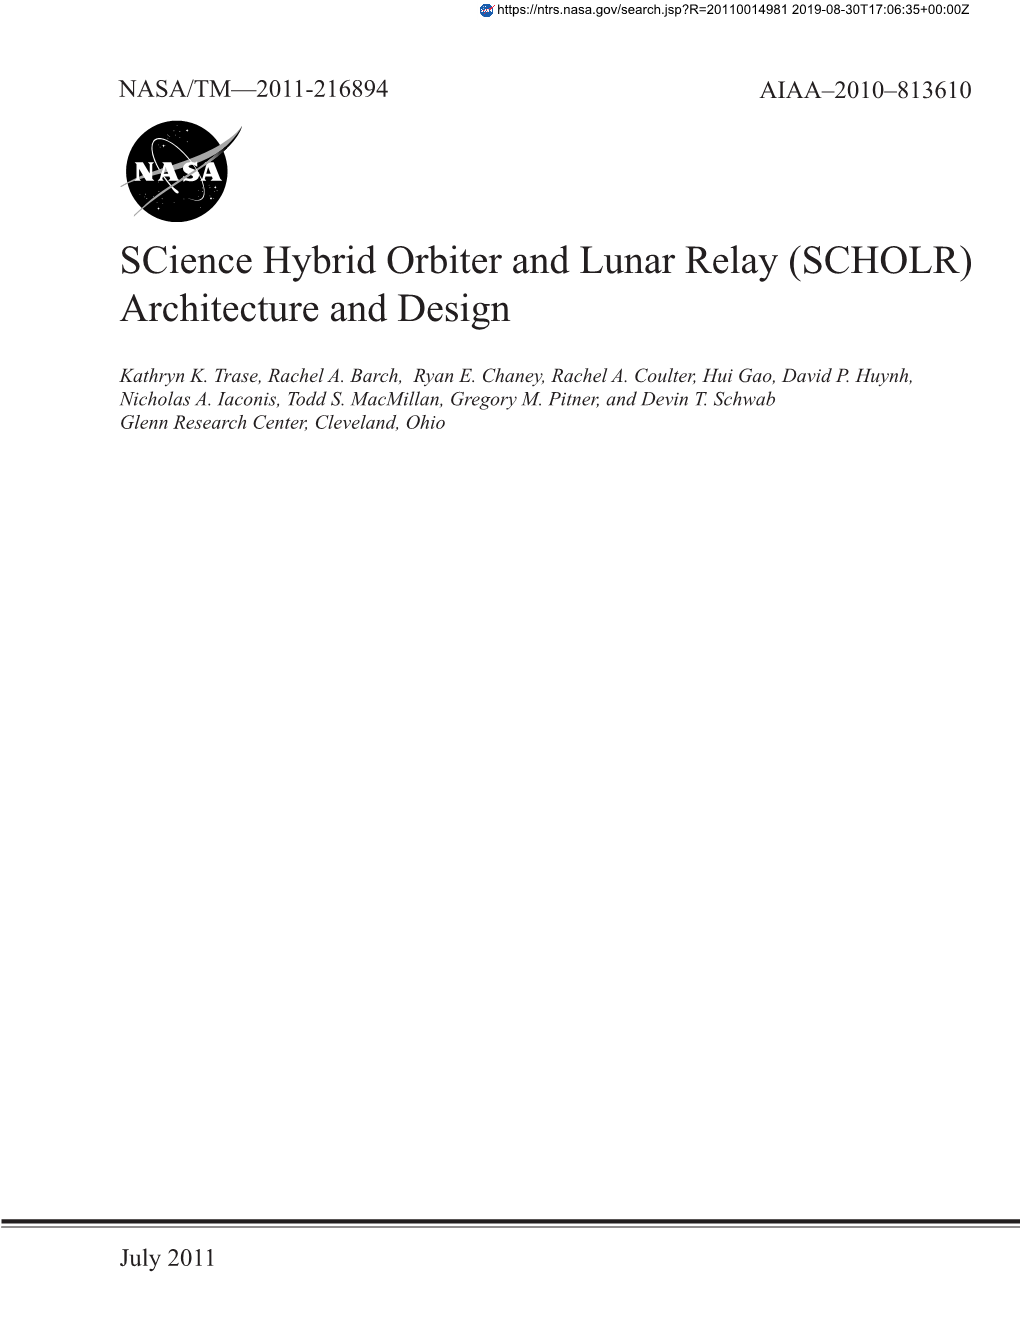 Science Hybrid Orbiter and Lunar Relay (SCHOLR) Architecture and Design